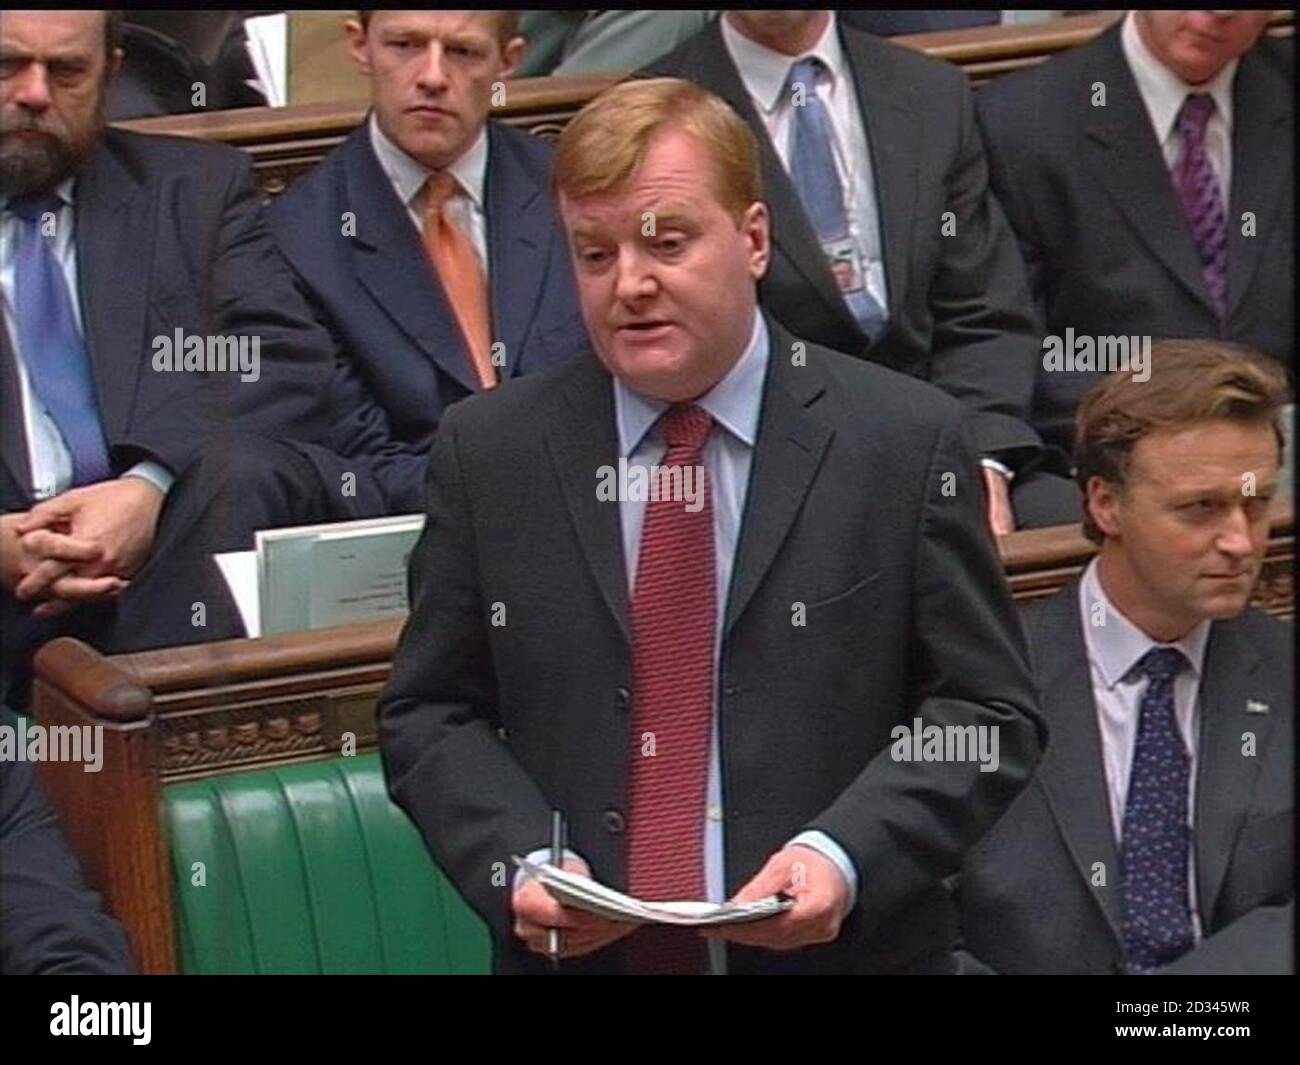 Screen grab of Liberal Democrat leader Charles Kennedy during Prime Minister's Questions at the House of Commons, London. Stock Photo